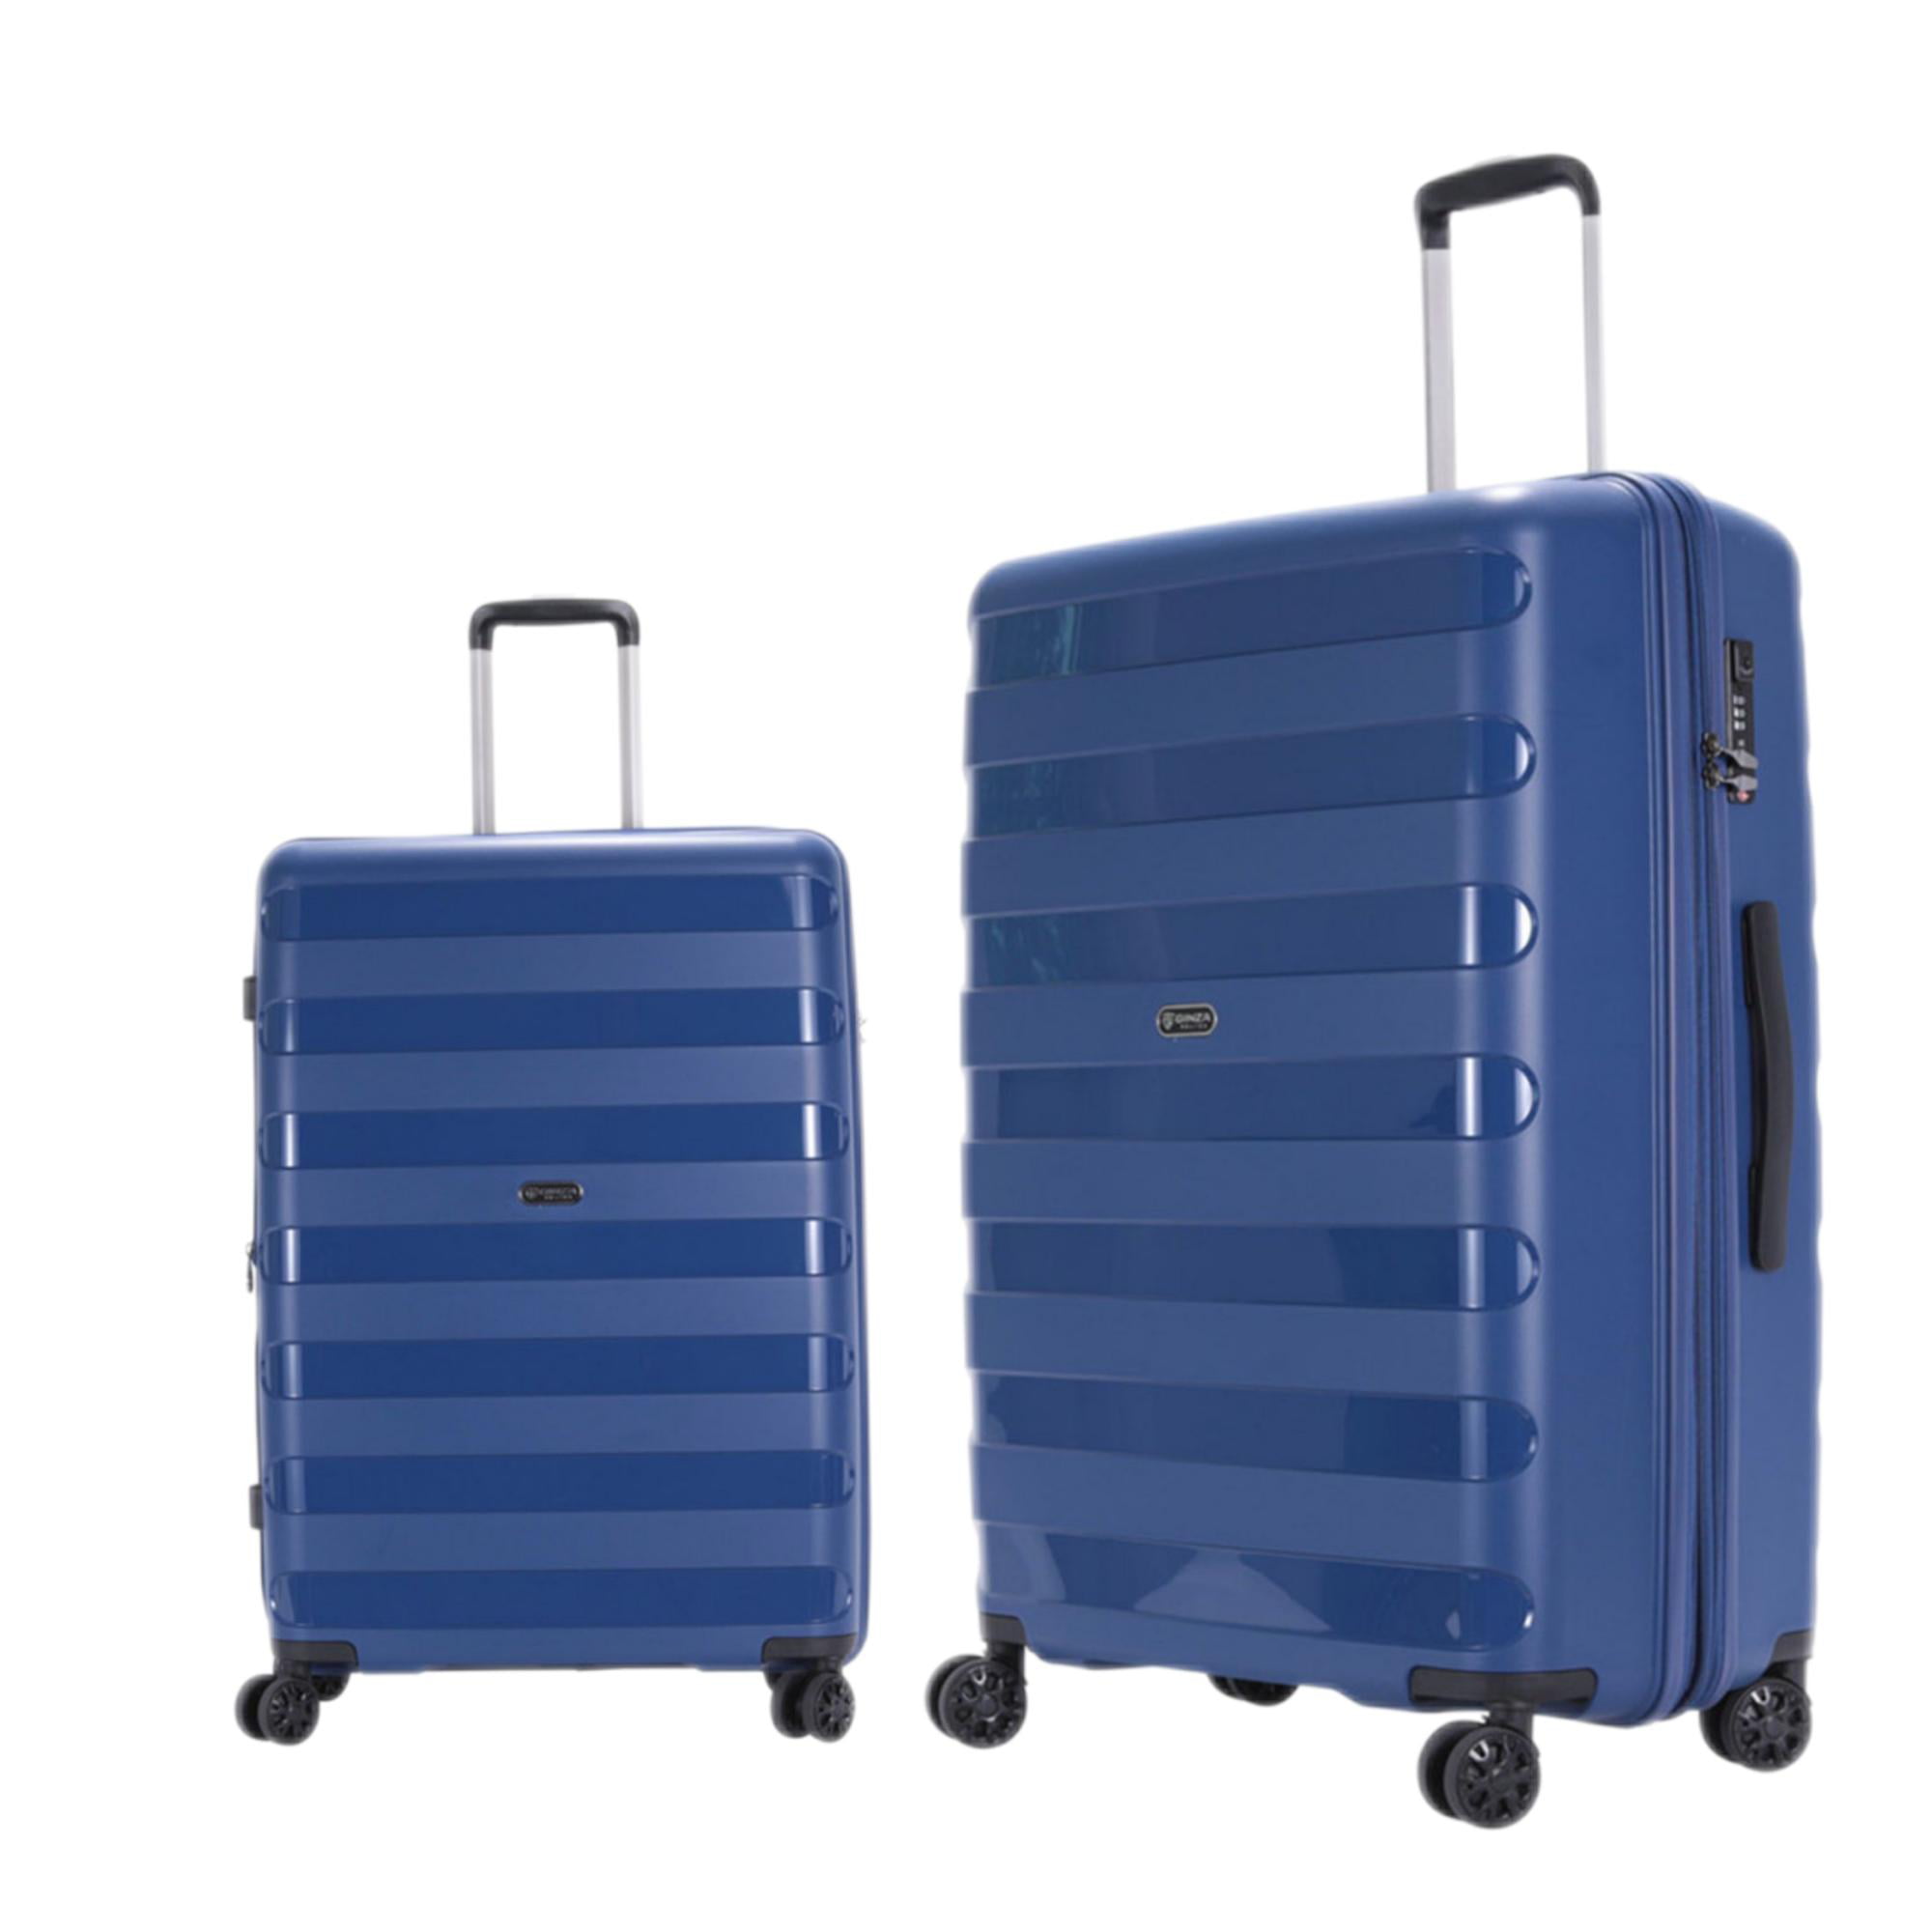 Safe Travel Luggage Set Of 2 Pieces - Navy Blue